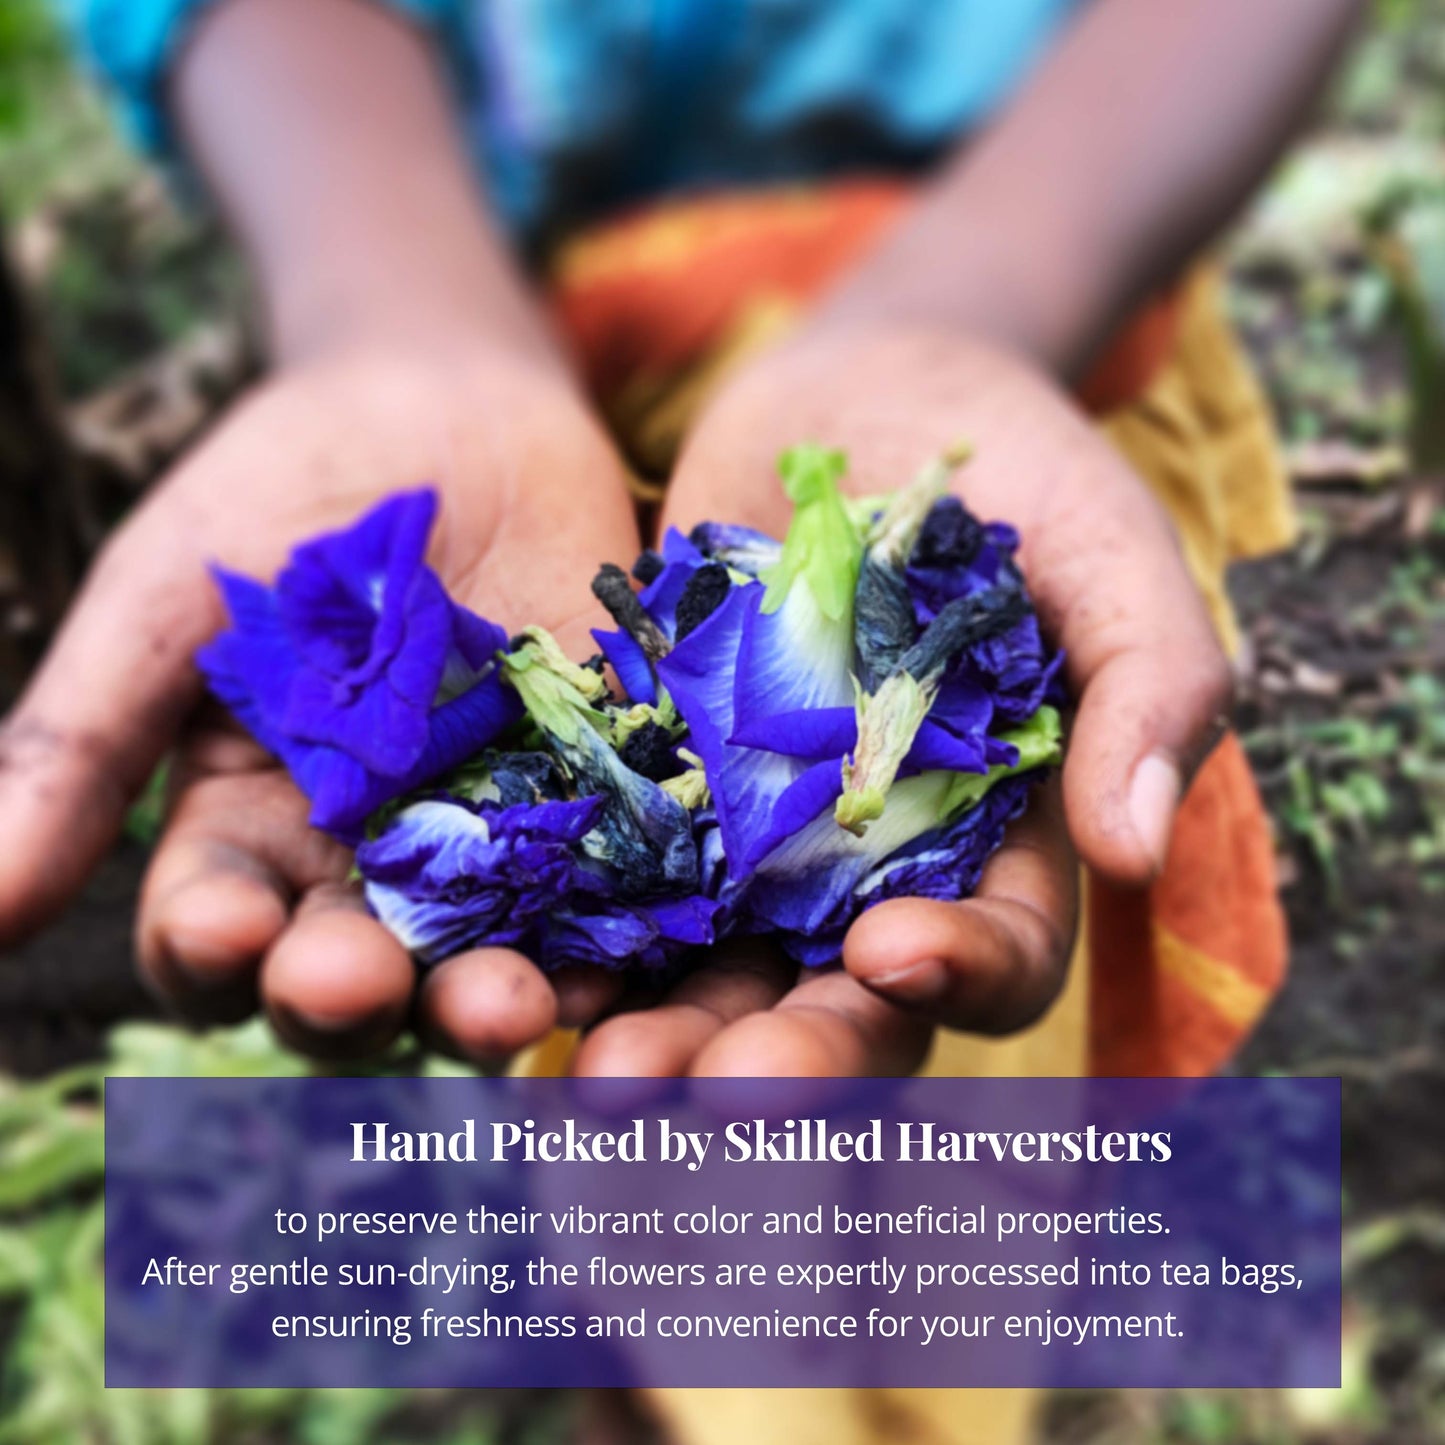 
                  
                    Hand Picked Butterfly pea flowers by Skilled Harversters to preserve their vibrant color and beneficial properties. After gentle sun-drying, the flowers are expertly processed into tea bags, ensuring freshness and convenience for your enjoyment.
                  
                